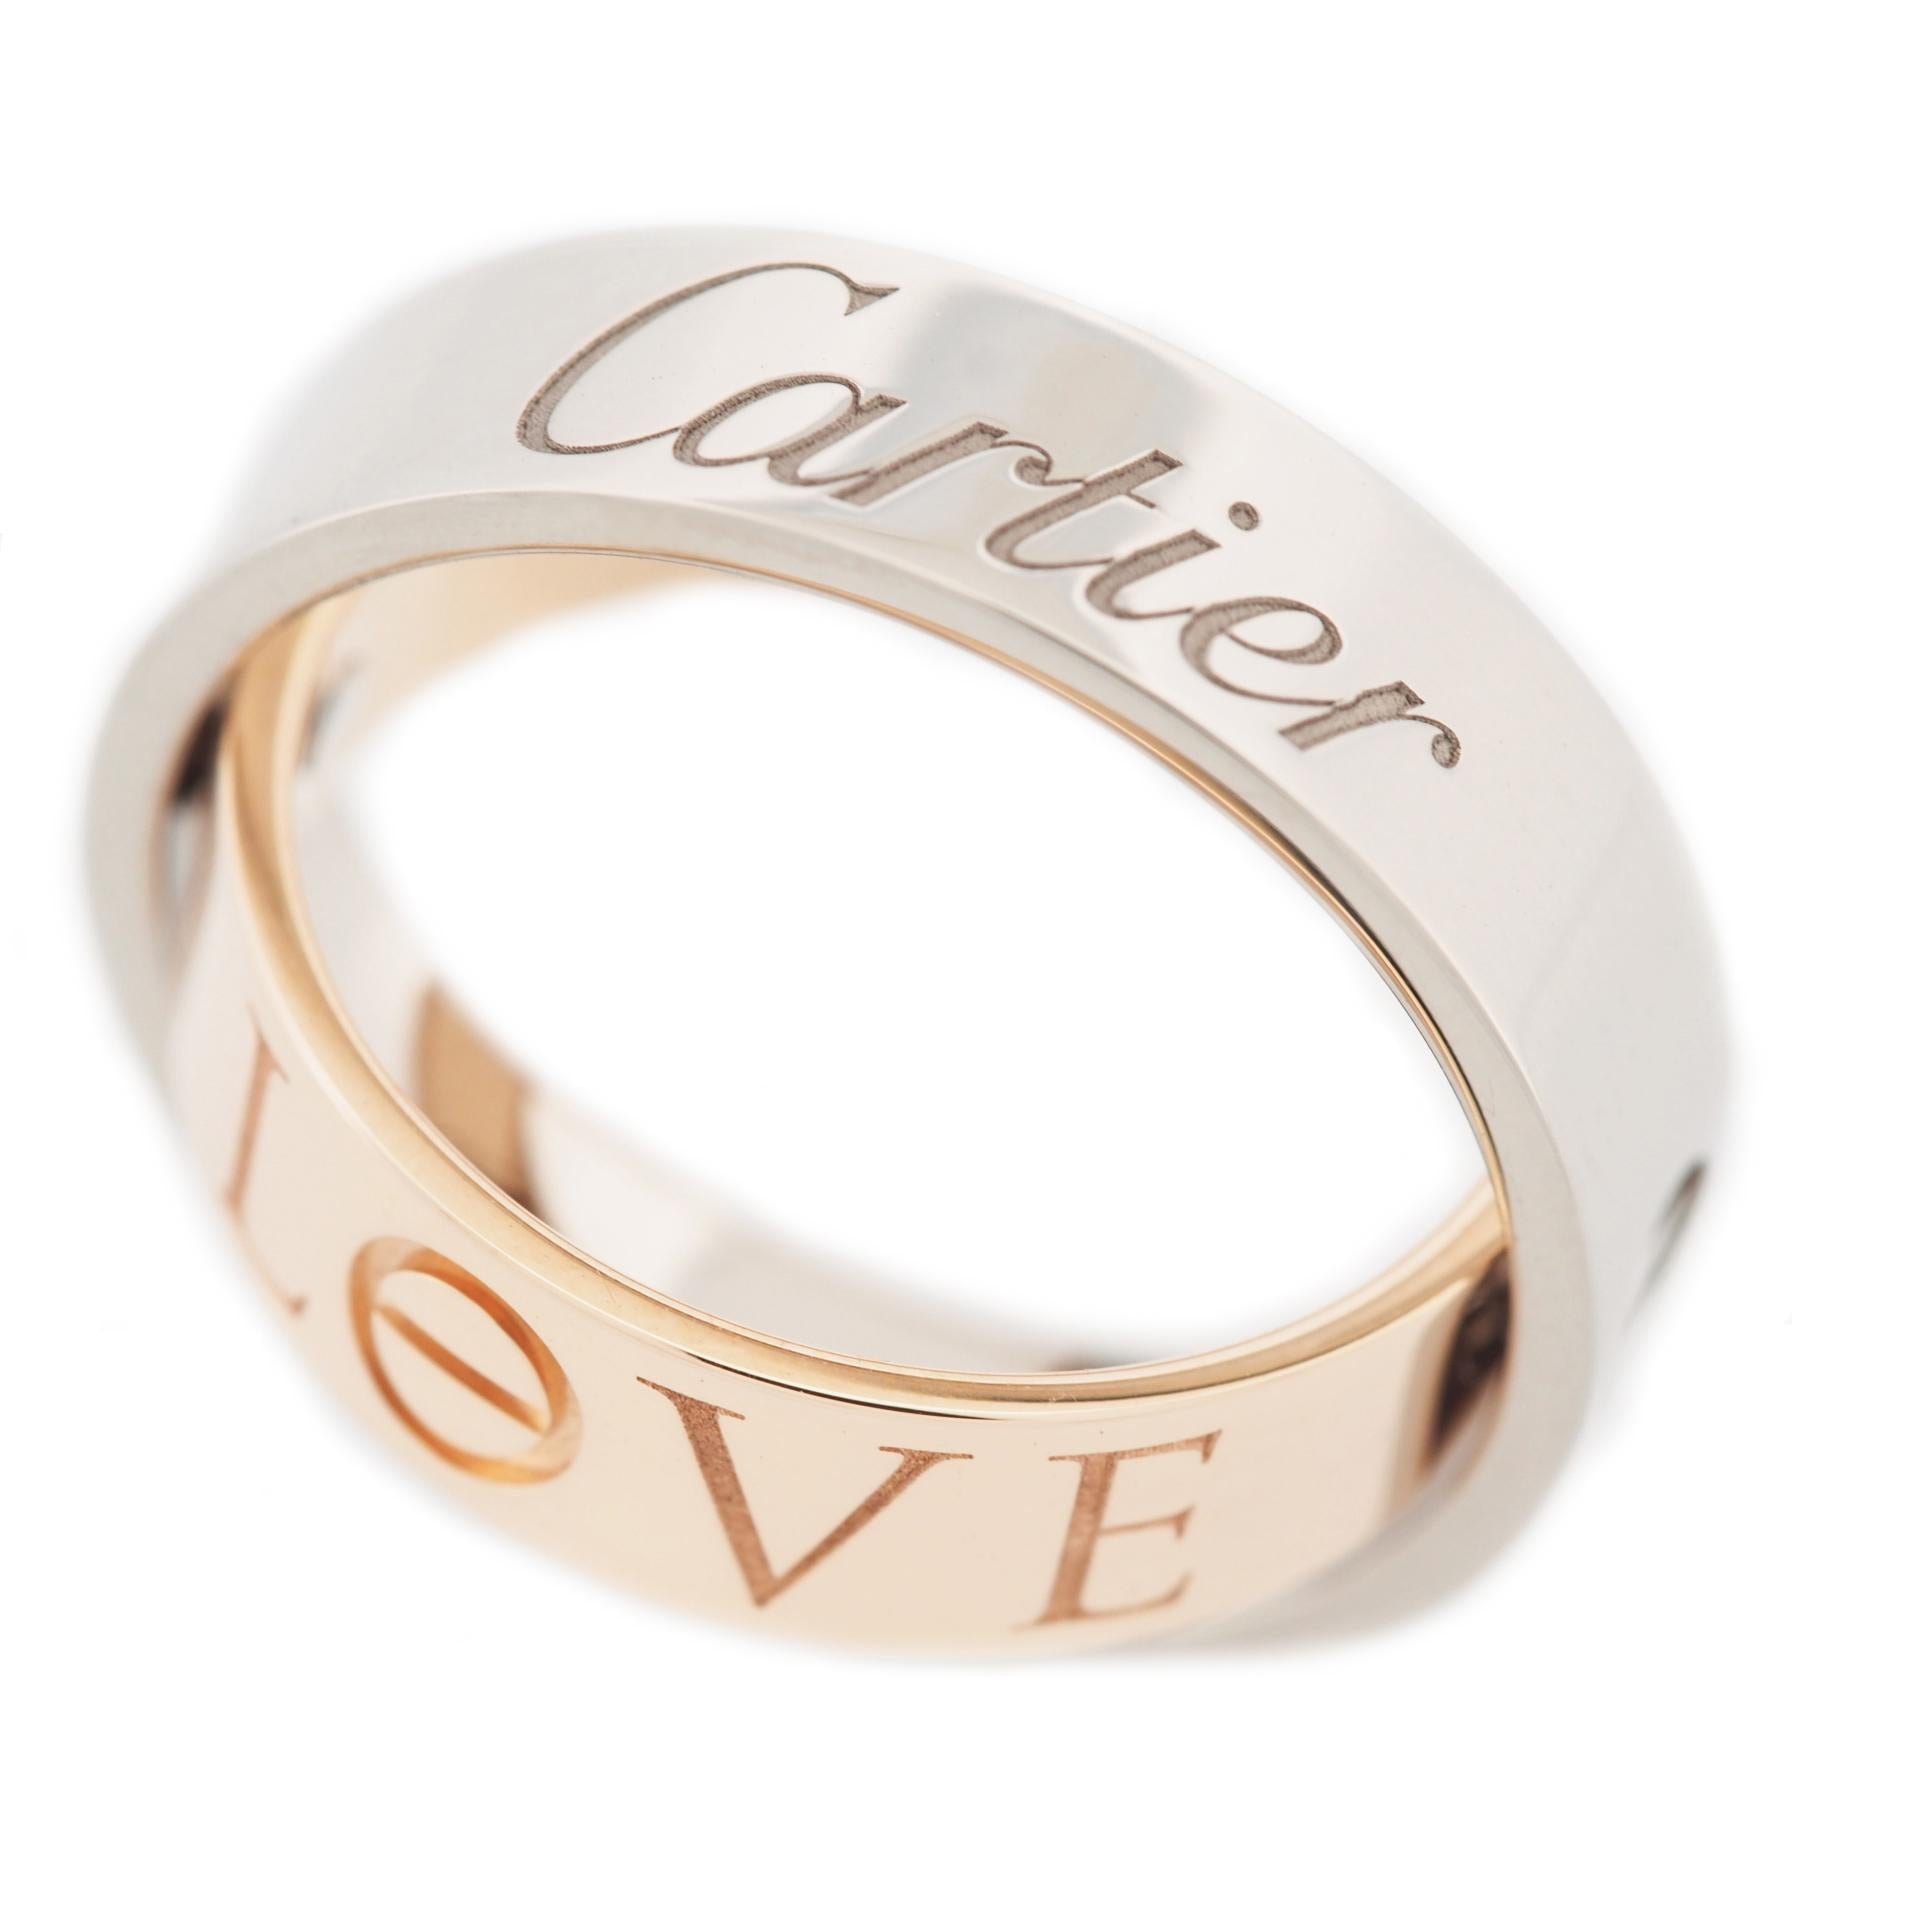 Item: Authentic Cartier Love Secret Ring ( 2005 Limited Edition )
Stones: ---
Metal: 18K Rose & White Gold
Ring Size: 53 US SIZE 6.25 UK SIZE M 1/4
Internal Diameter:  16.85 mm
Measurement:  5.5 mm width
Weight:  11.1 Grams
Condition: Used